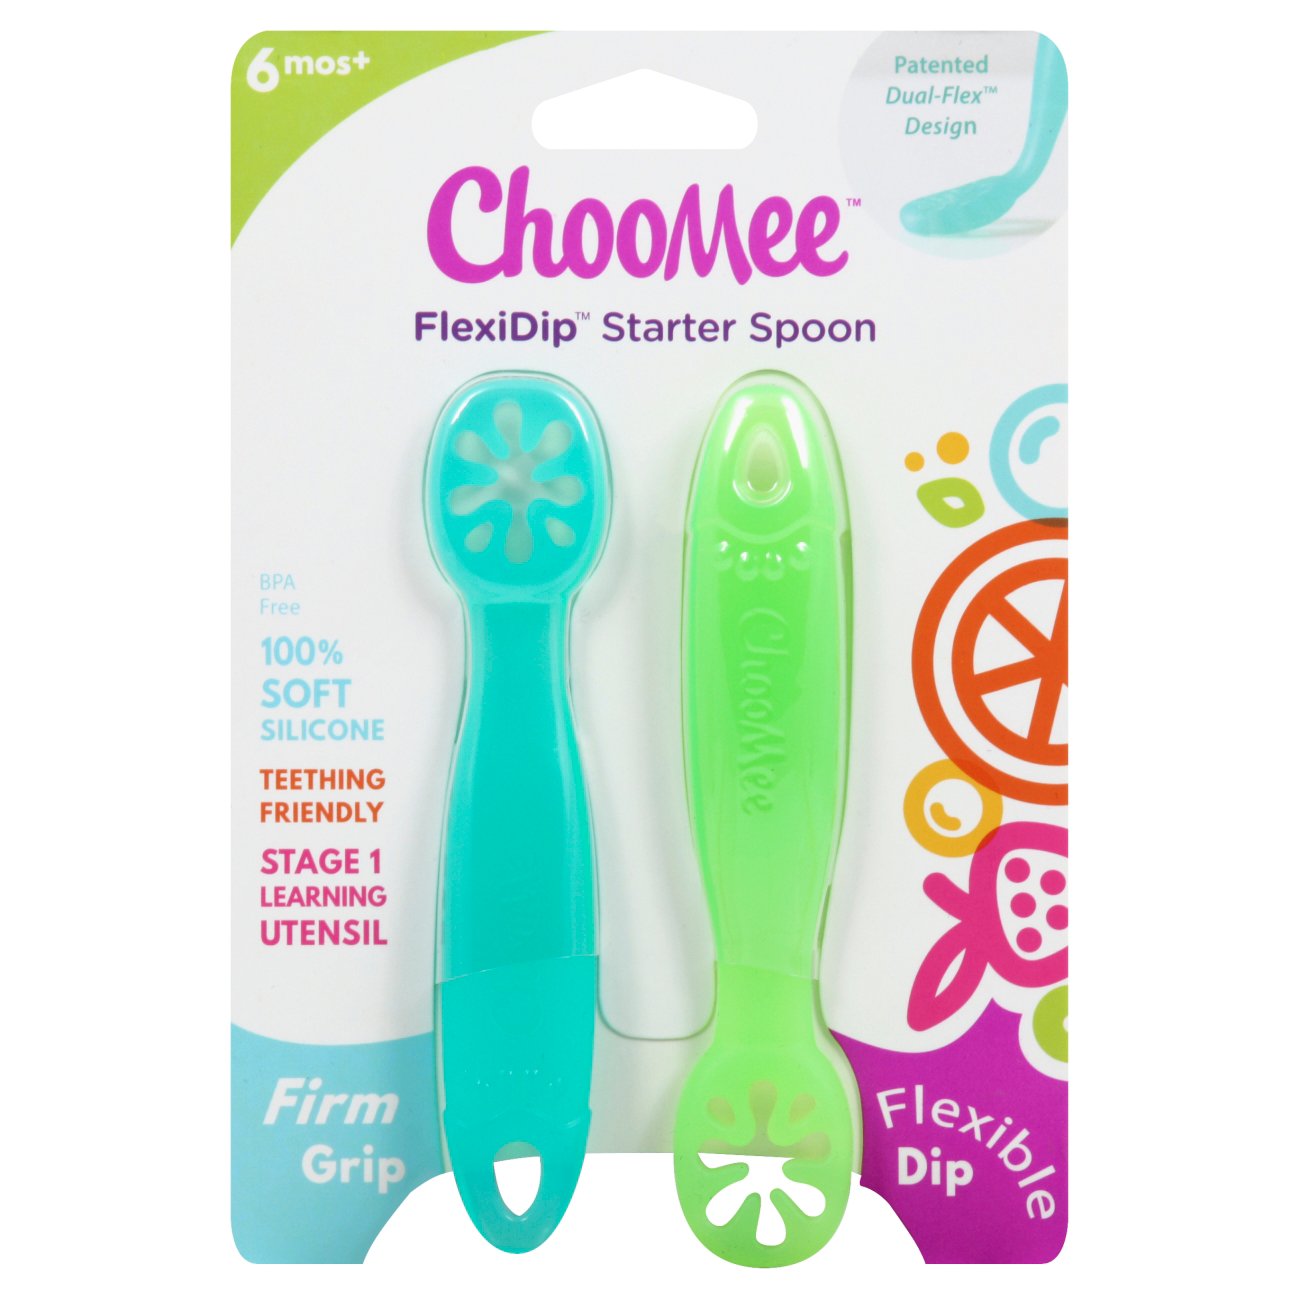 Teething Friendly Pink Purple ChooMee FlexiDip Starter Spoon 100% Soft Silicone 2 CT Learning Utensil 